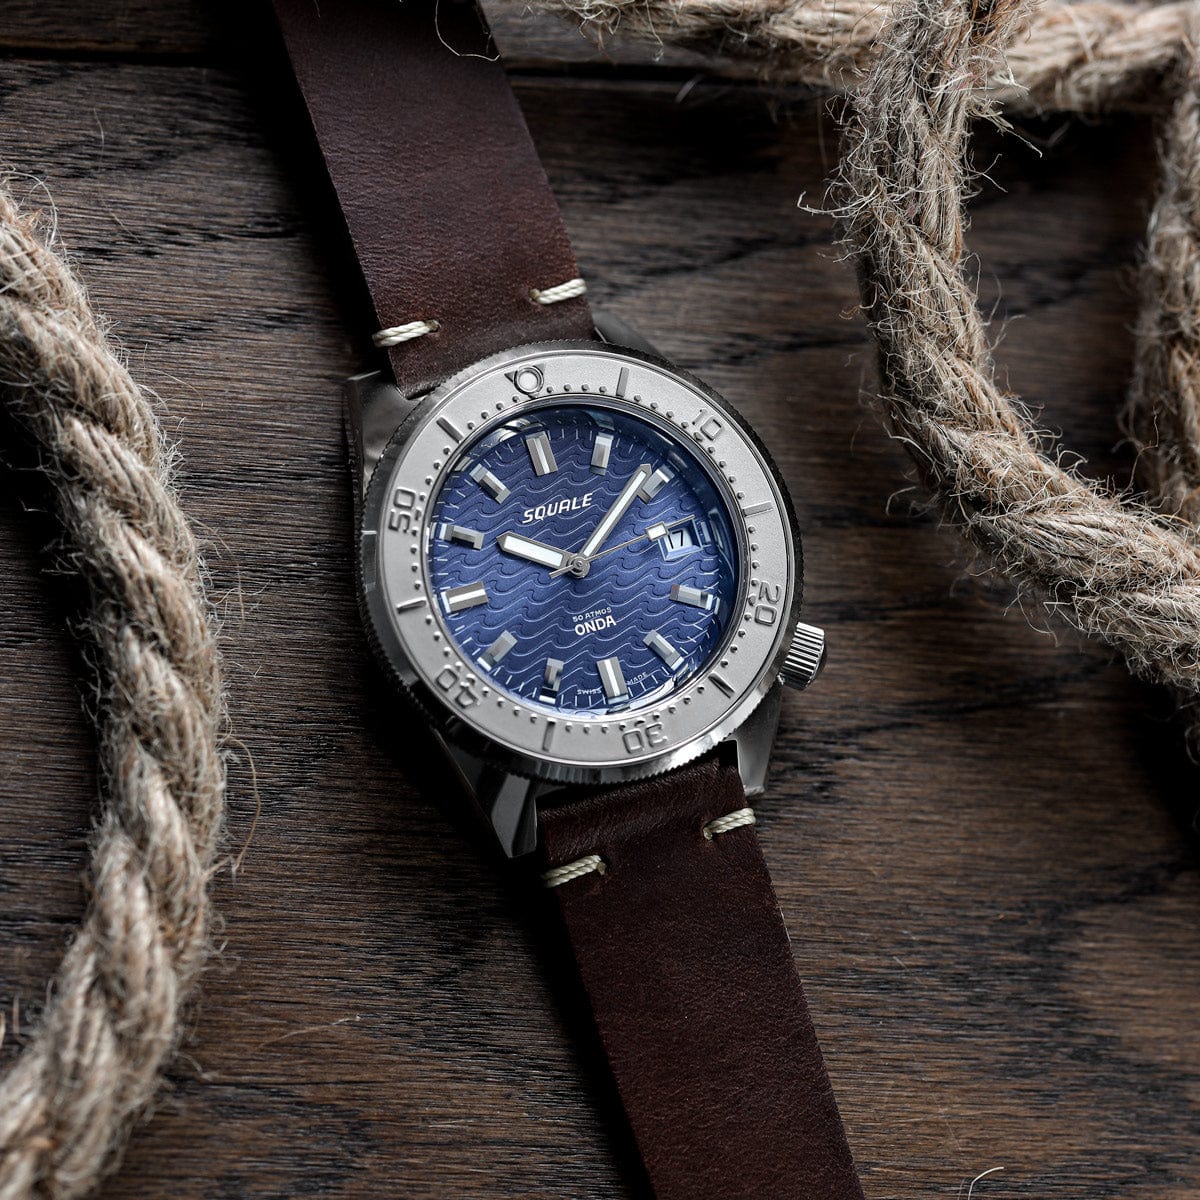 Squale 1521 Onda Blue Dial Swiss Made Diver's Watch